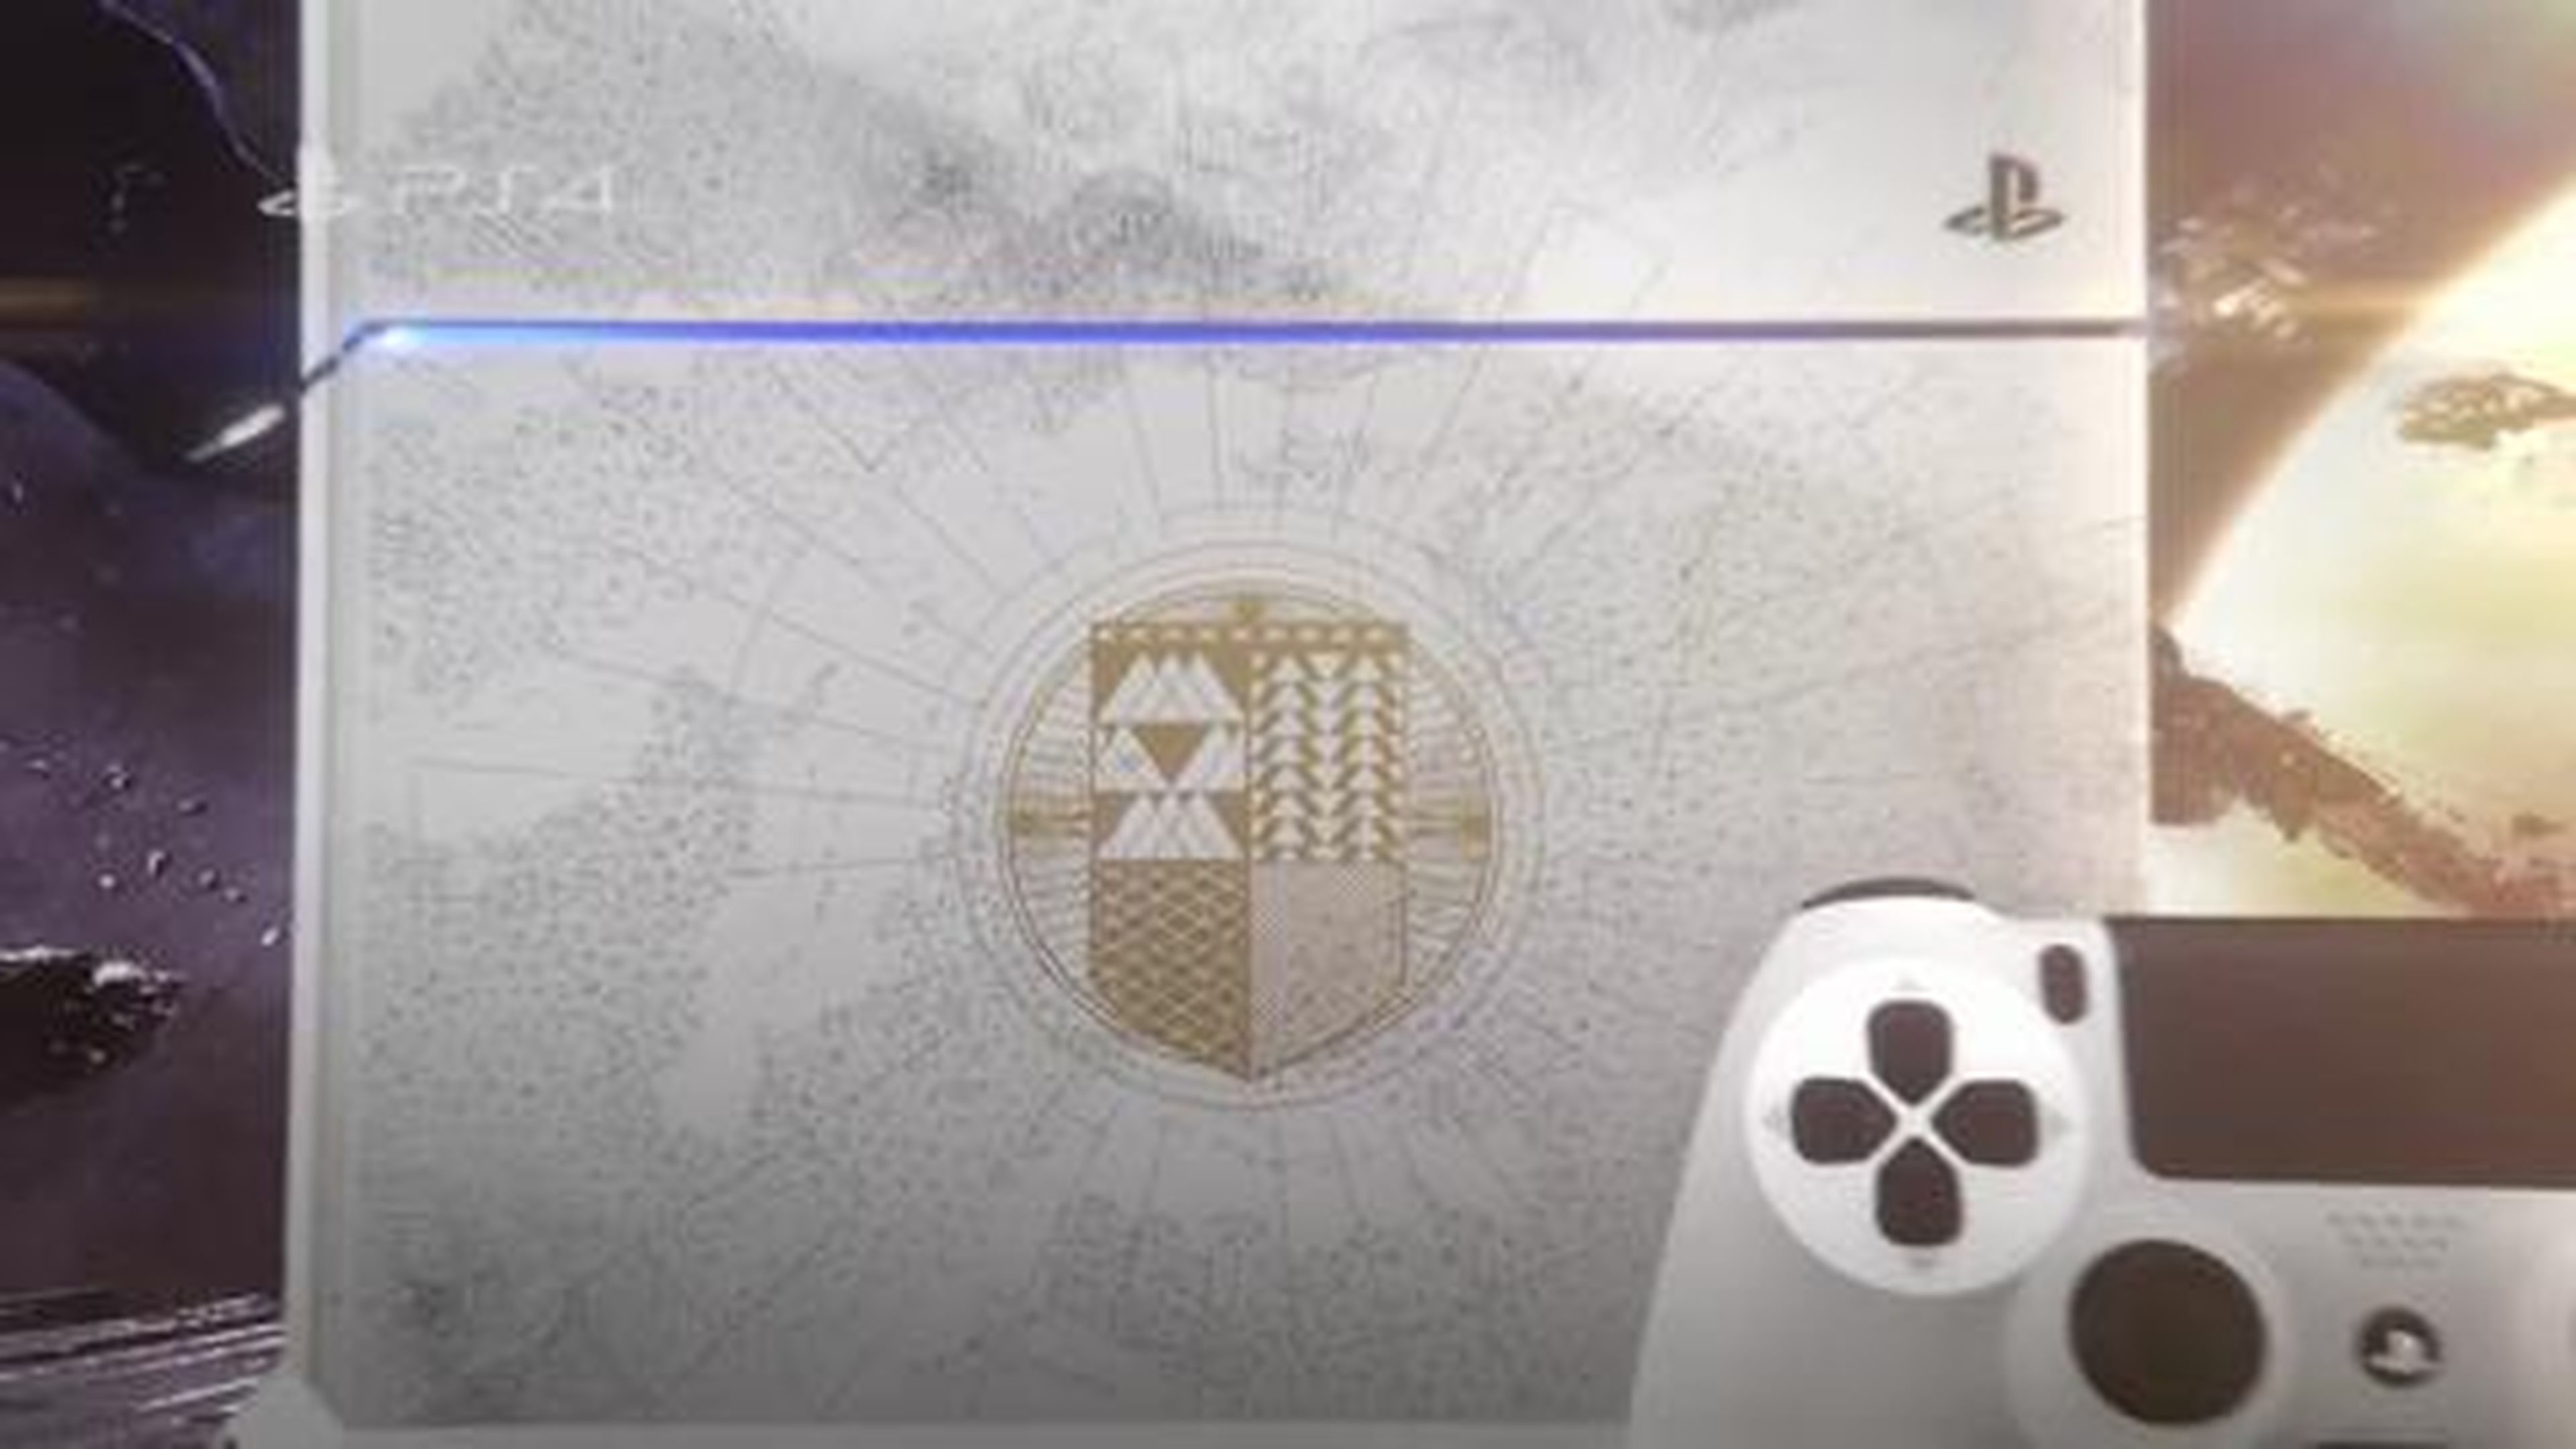 The Limited Edition Destiny- The Taken King PS4 Bundle